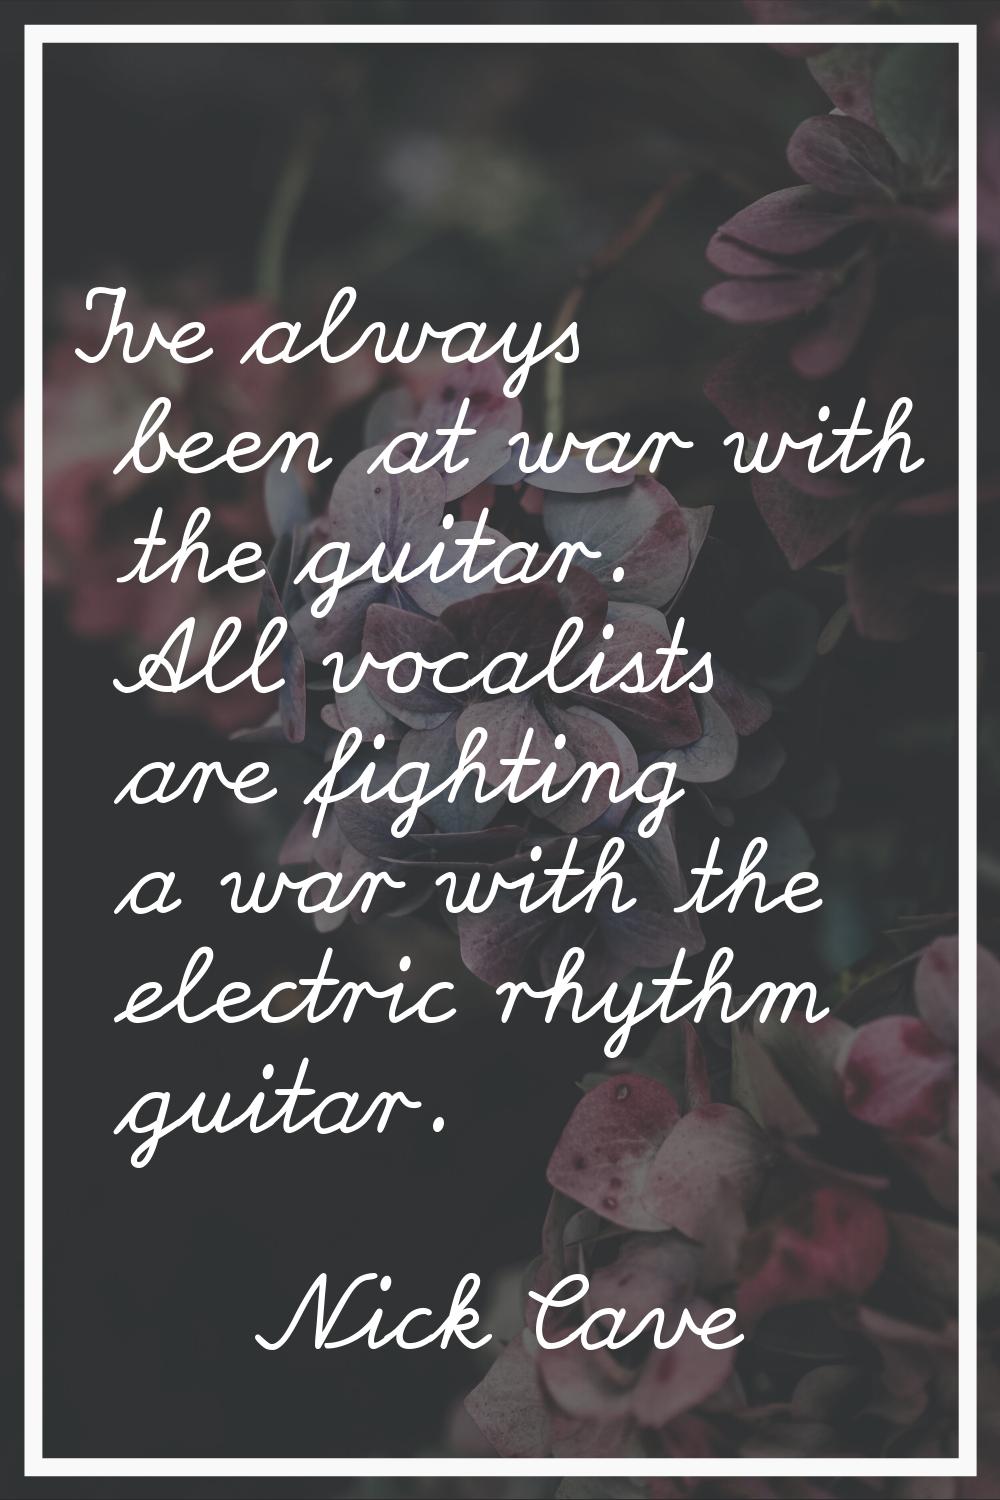 I've always been at war with the guitar. All vocalists are fighting a war with the electric rhythm 